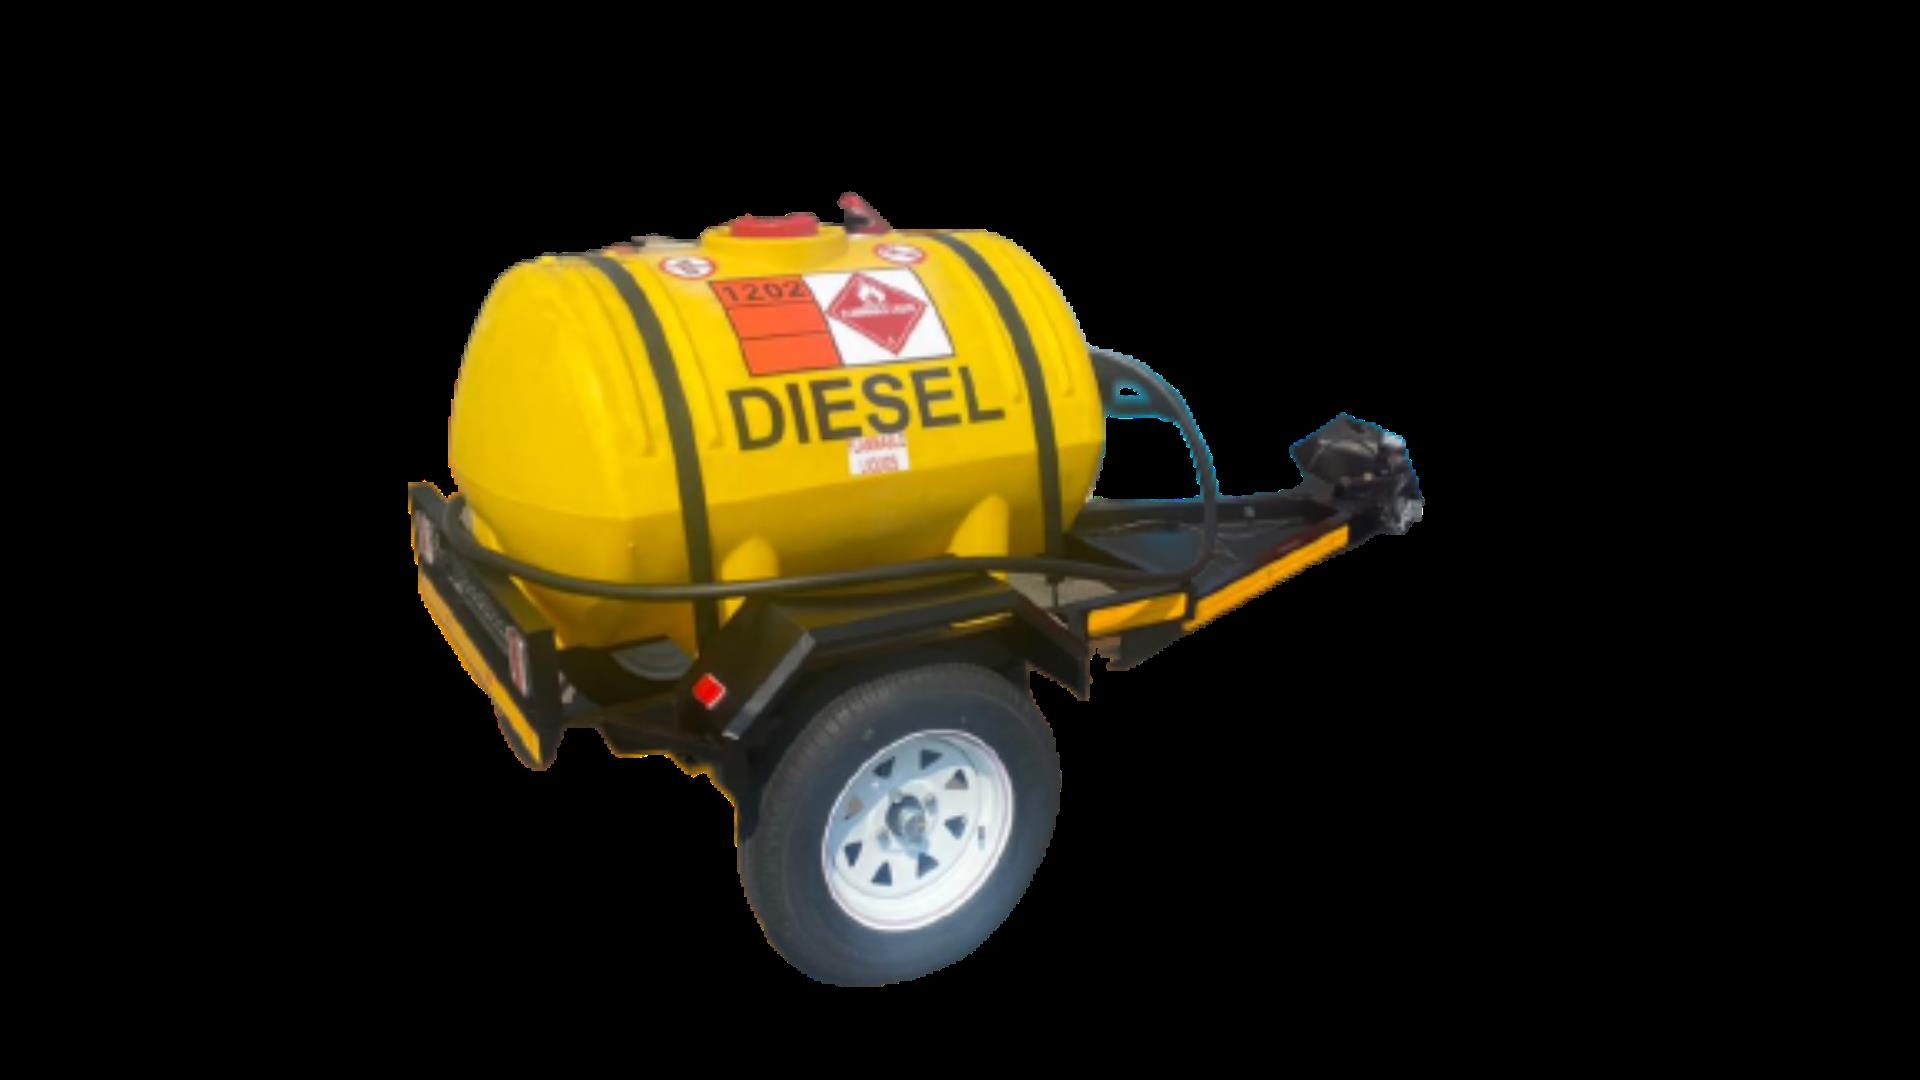 Custom Diesel bowser trailer 500 Litre Plastic Diesel Bowser Blk Friday Special 2021 for sale by Jikelele Tankers and Trailers   | Truck & Trailer Marketplaces